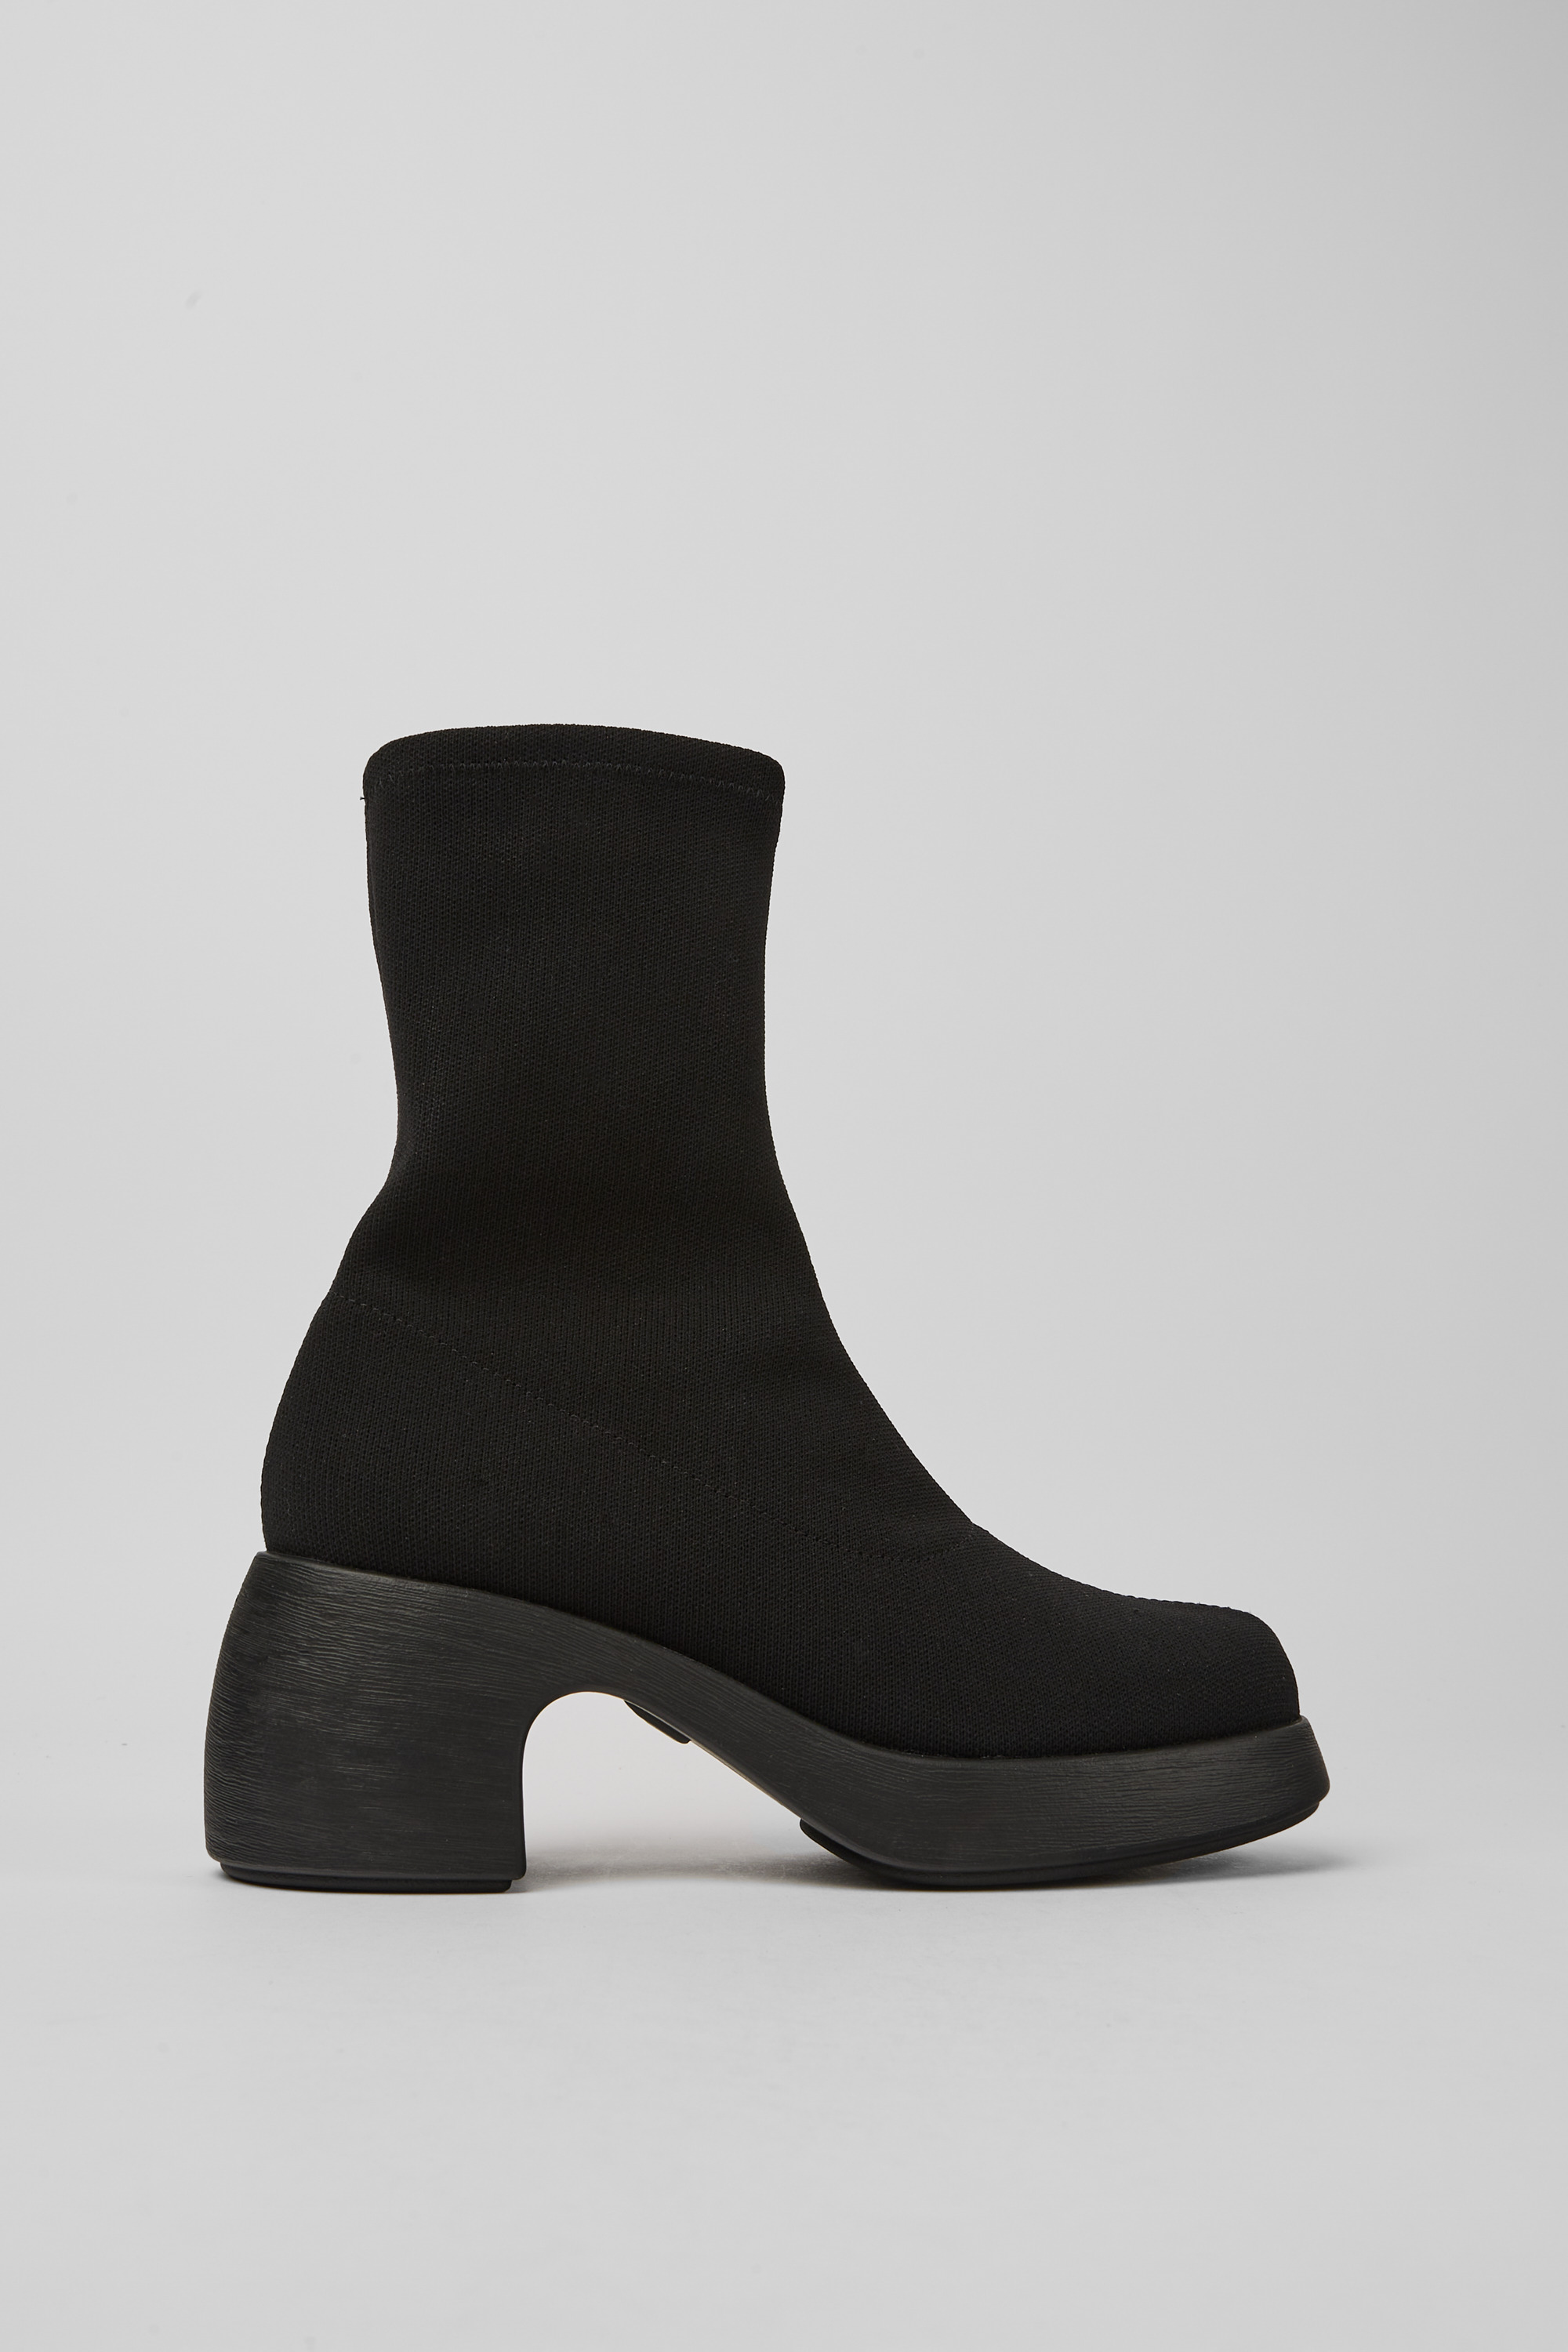 Thelma Black Boots for Women - Camper